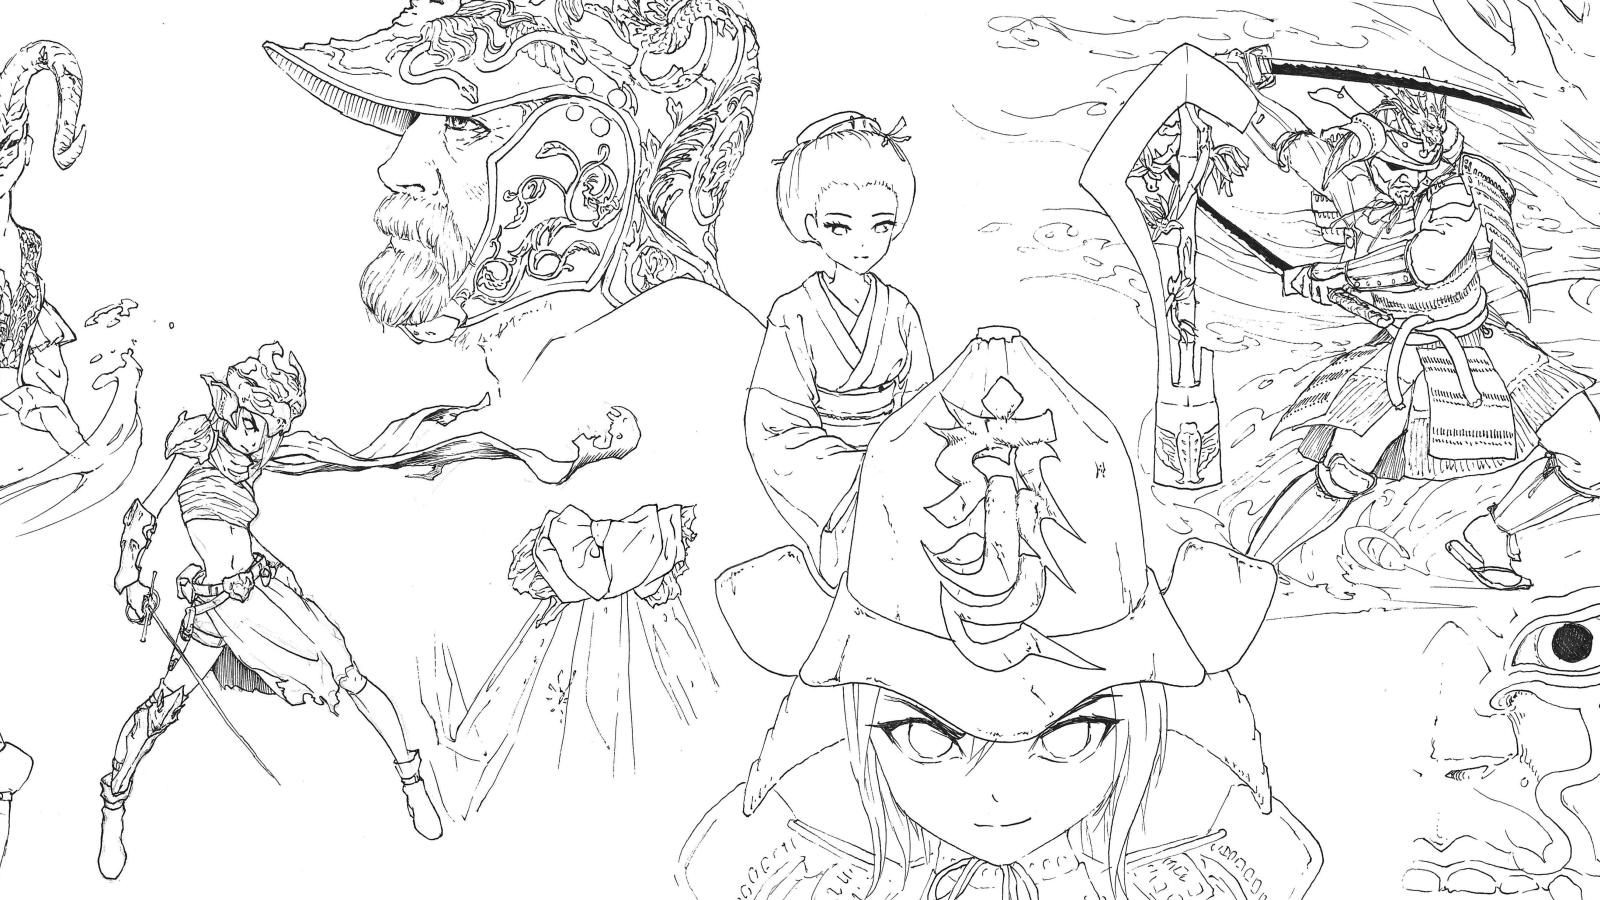 Line art drawing of characters